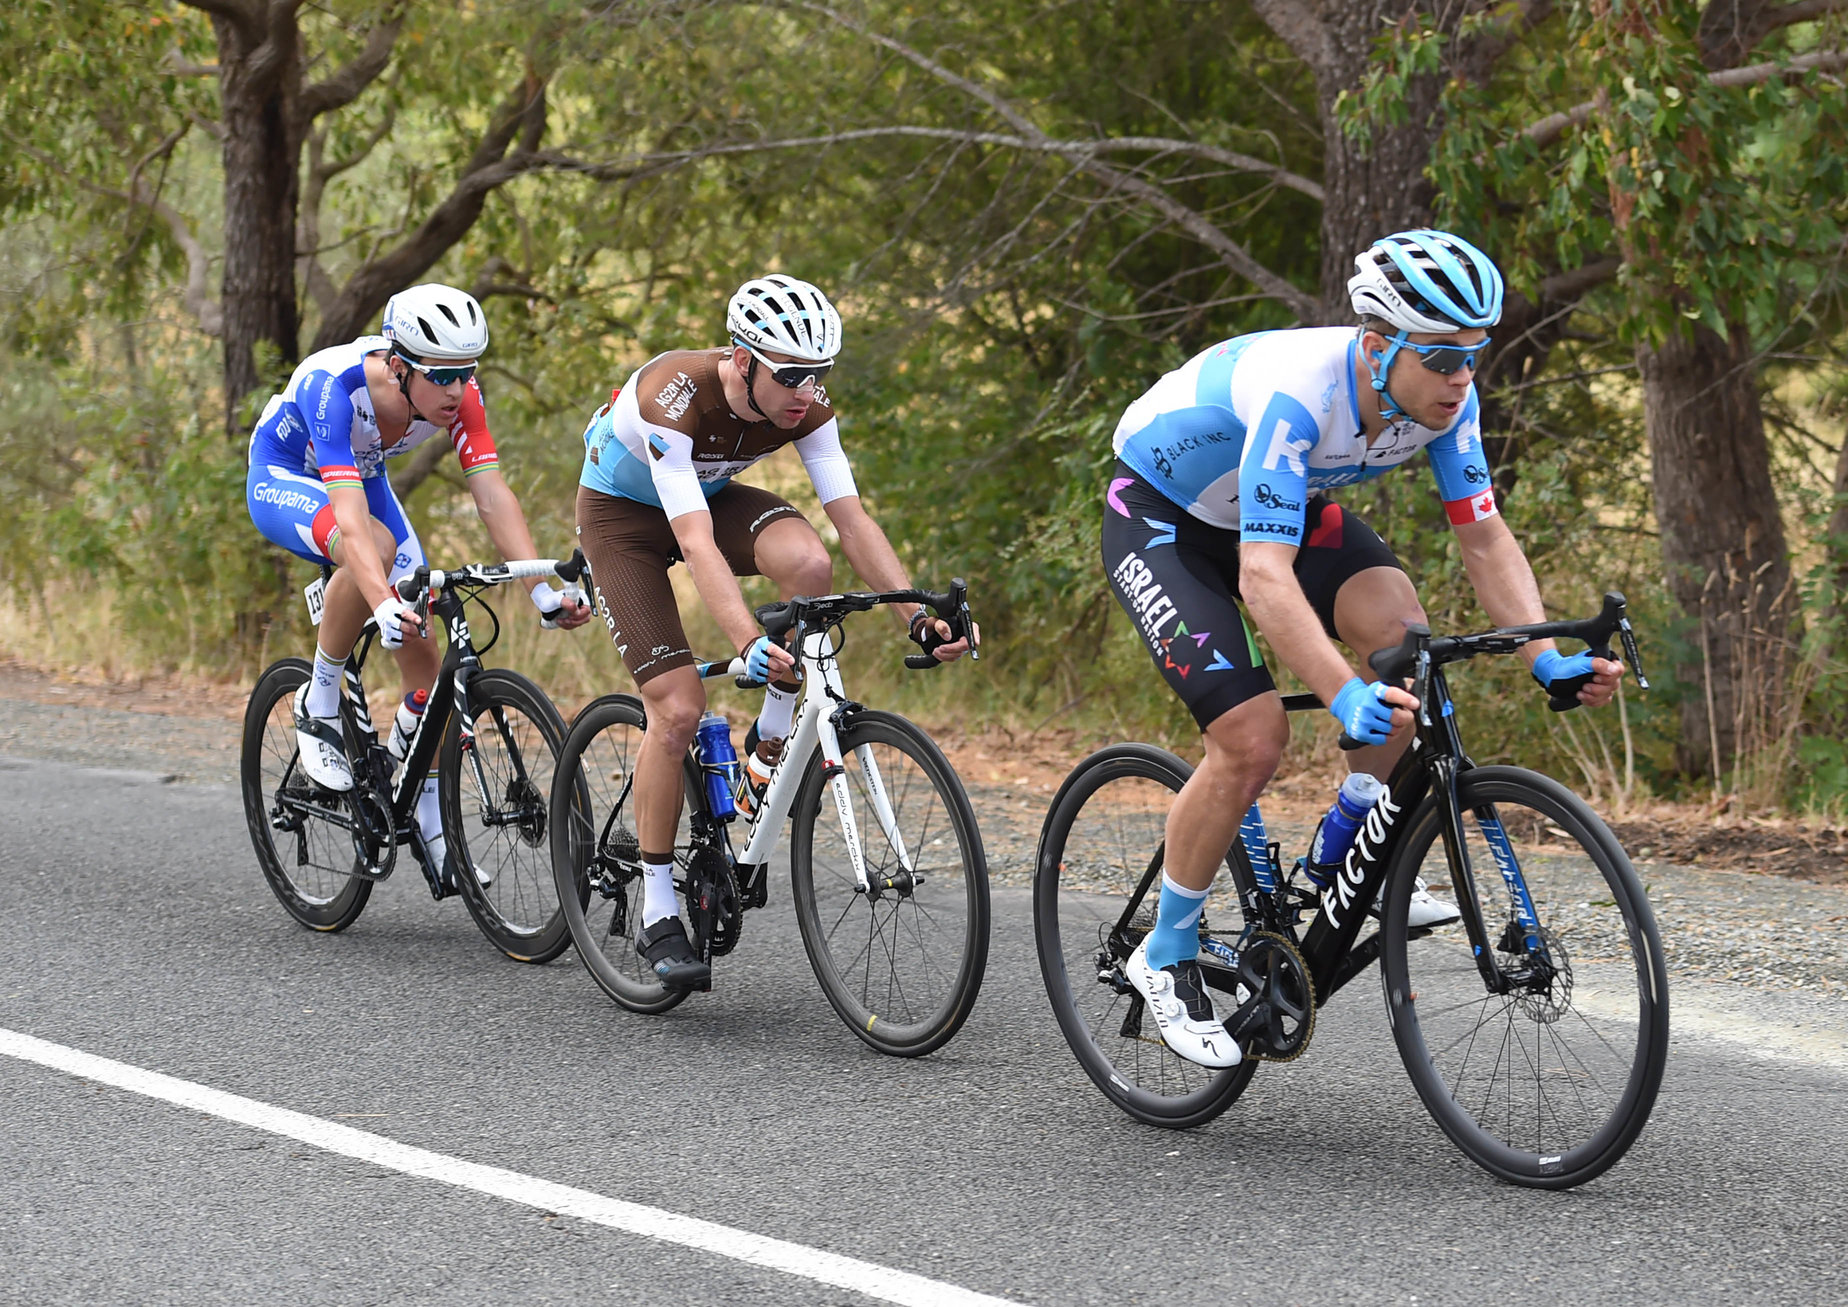 23-01-2020 Tour Down Under; Tappa 03 Unley - Paracombe; 2020, Groupama - Fdj; 2020, Israel Start Up Nation; 2020, Ag2r La Mondiale; Scotson, Miles; Boivin, Guillaume; Bouchard, Geoffrey;